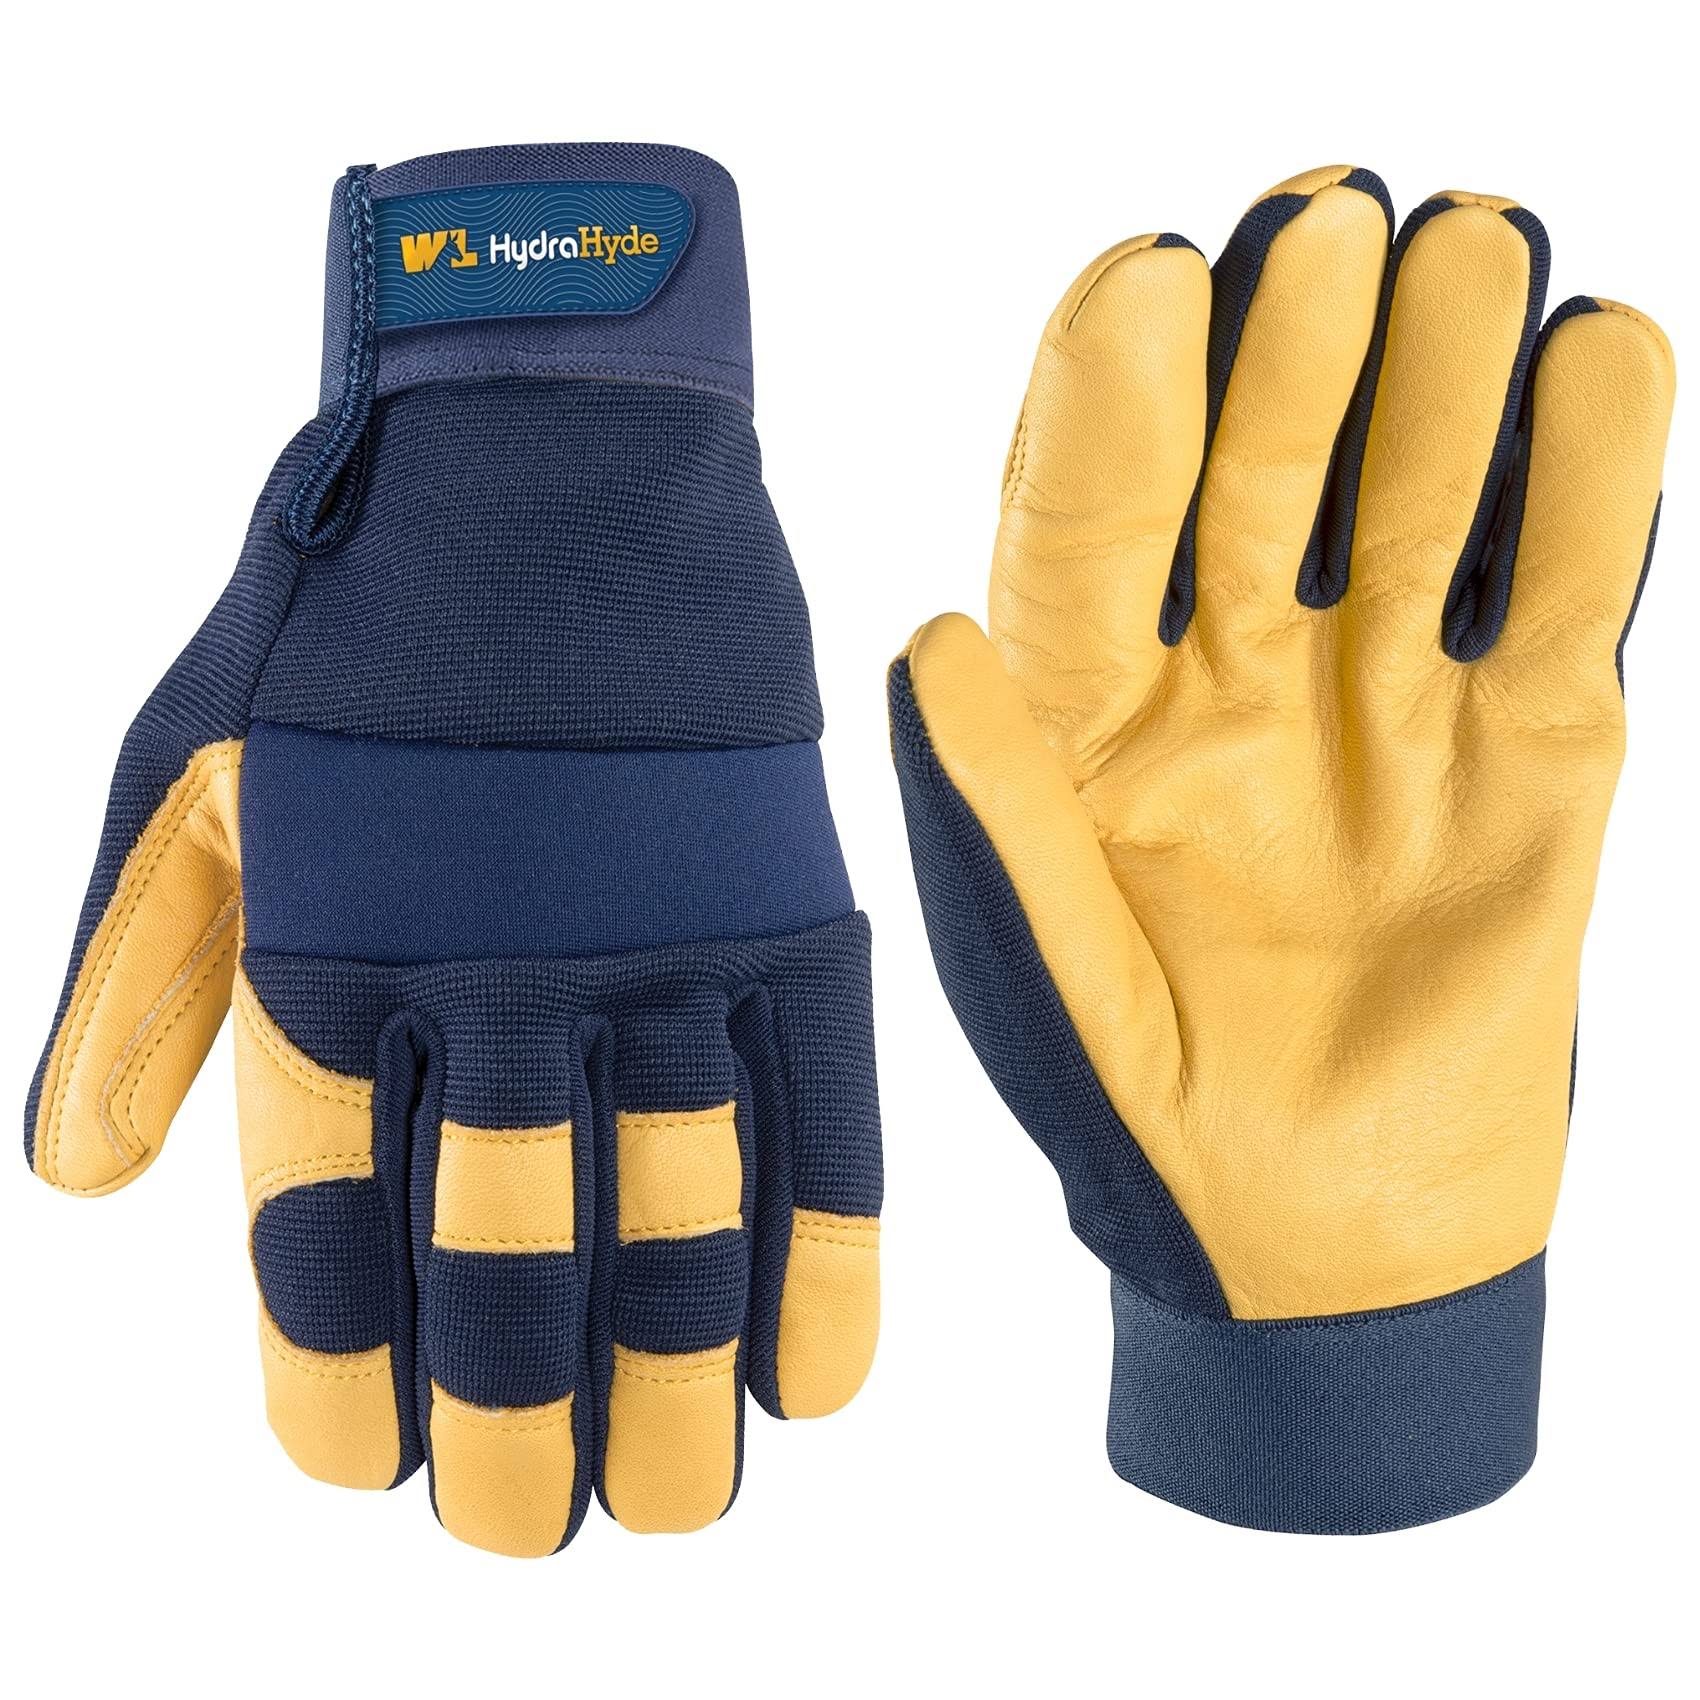 Wells Lamont Men's Water-Resistant Hydra Hyde Work Gloves - Blue/Yellow, X-Large